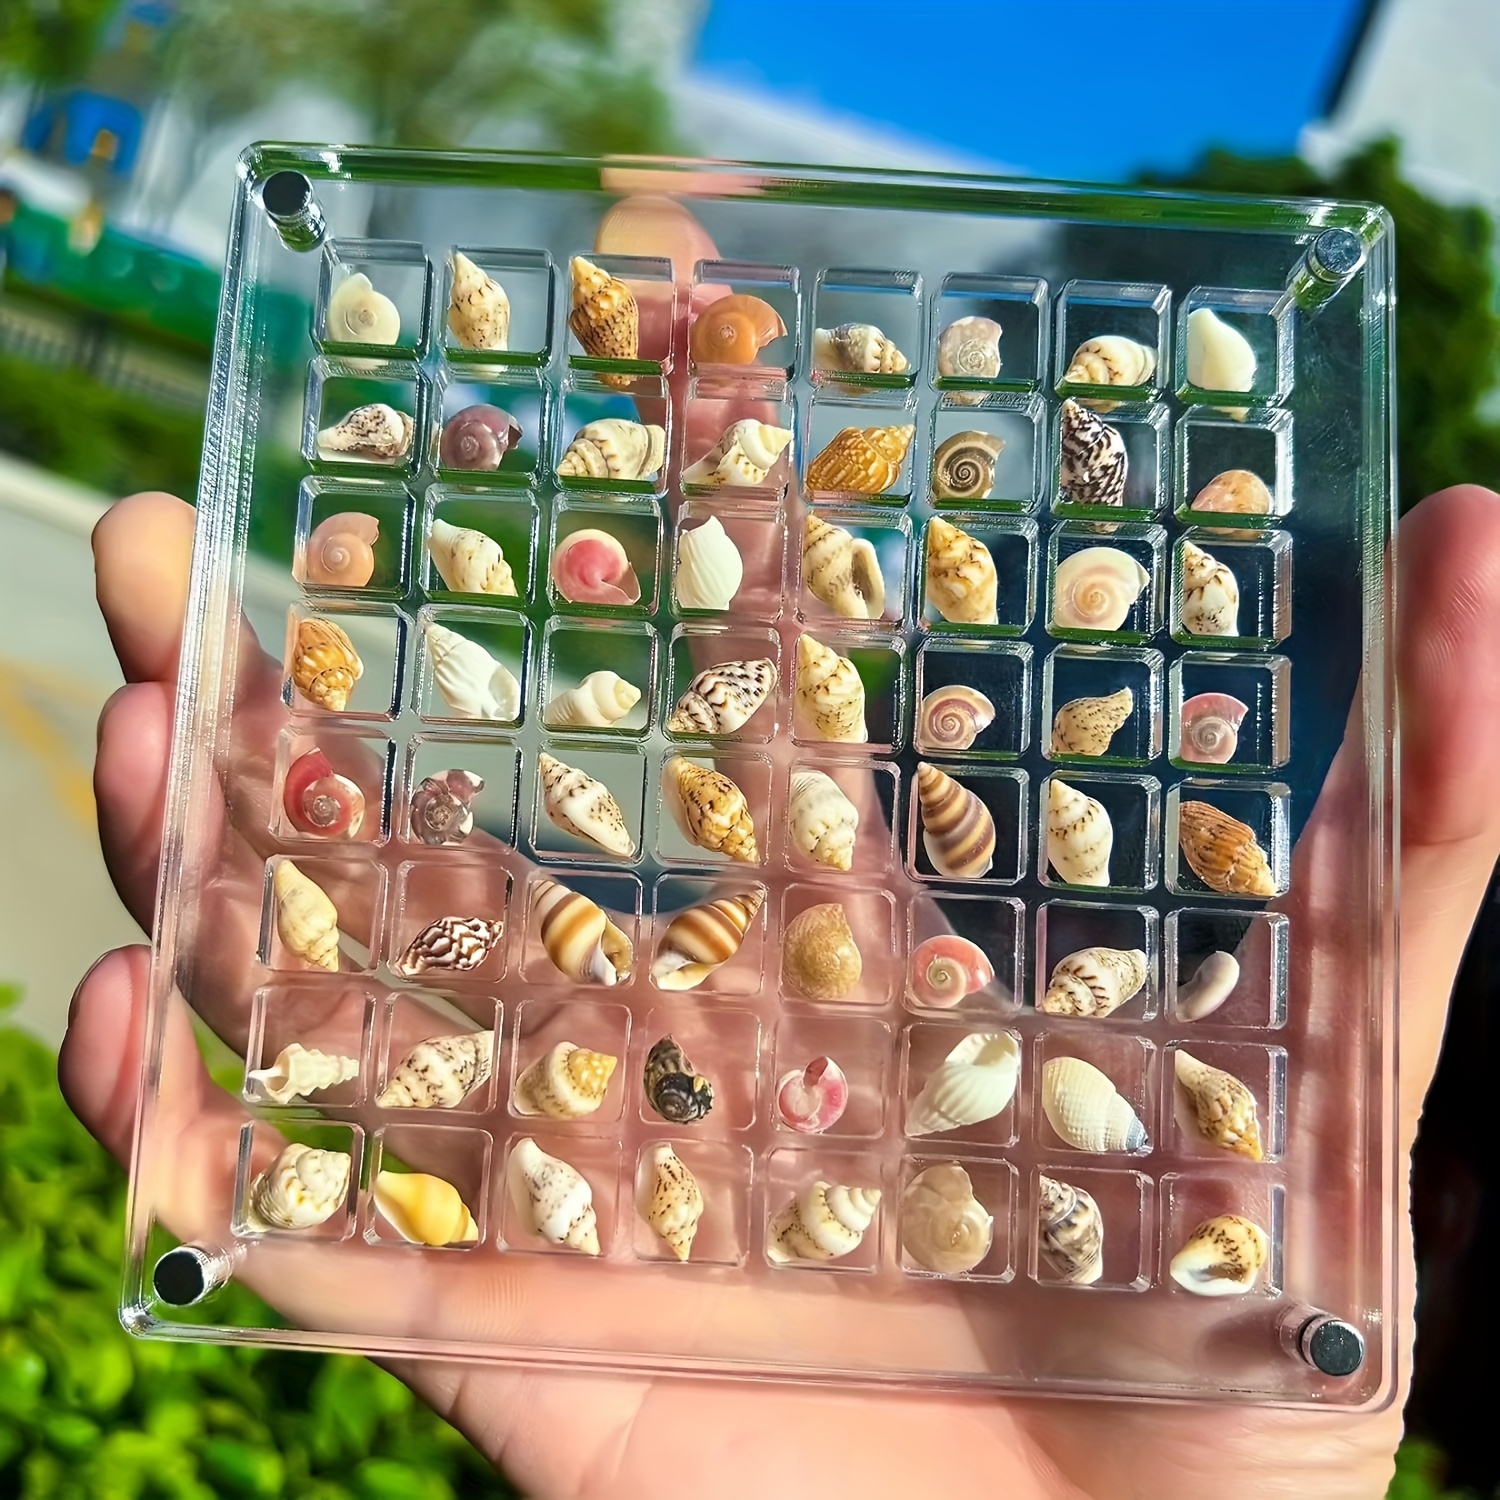 

elegant" 64-grid Acrylic Magnetic Display Case For Seashells, Starfish & Jewelry - Stackable Organizer Box For Craft Supplies